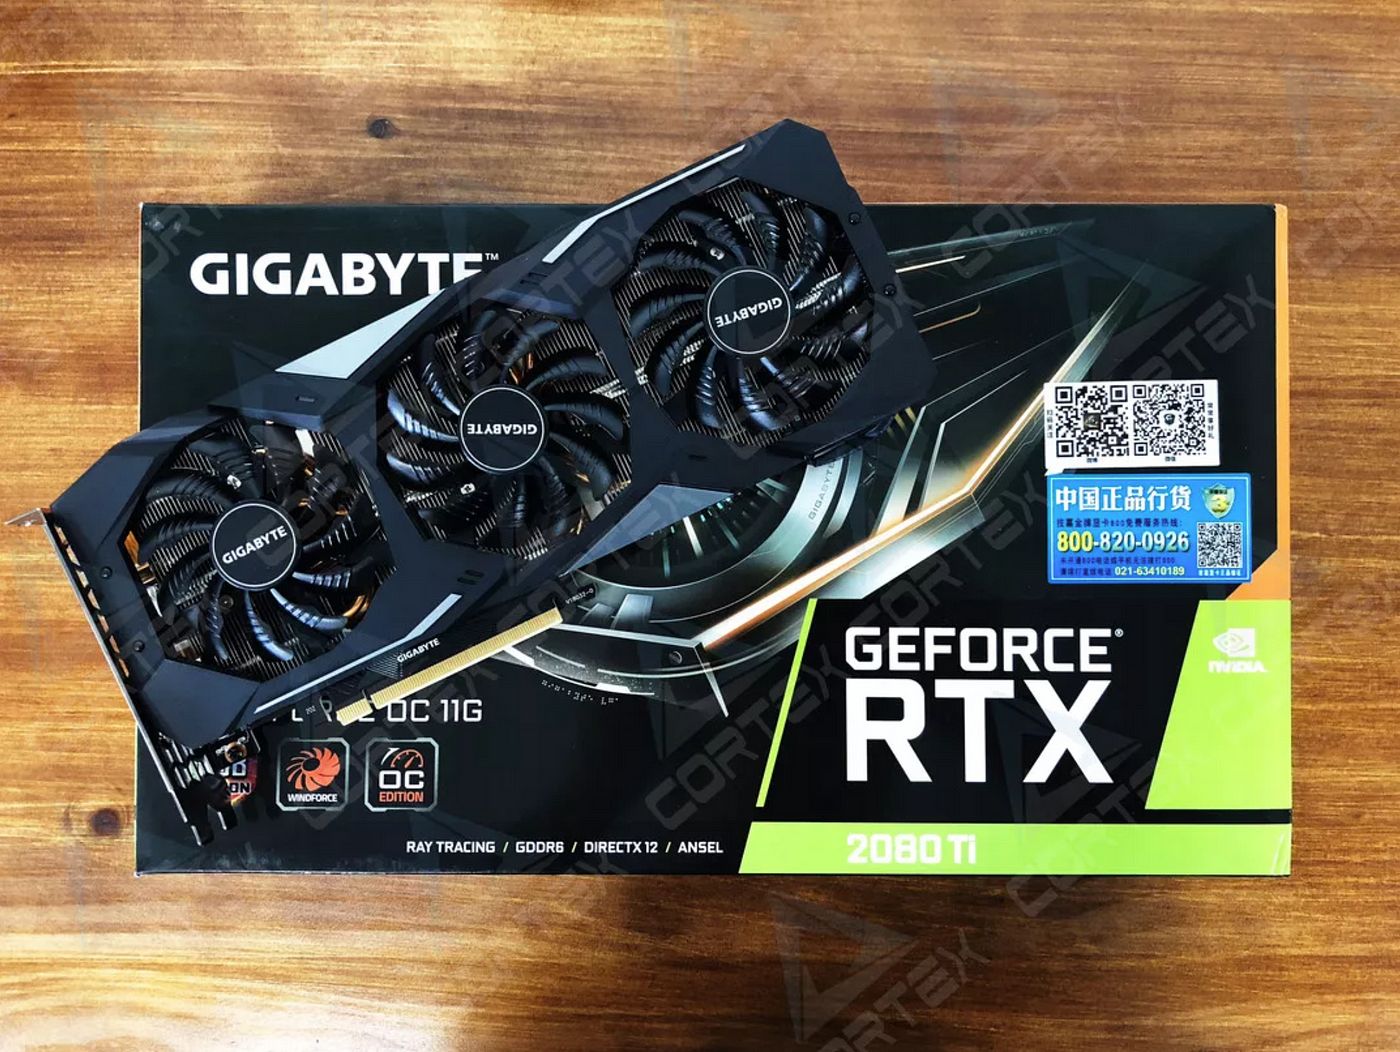 NVIDIA GeForce RTX 2080 Ti Mining Review: To 50 MH/s and beyond | by Oscar  W | Cortex Labs | Medium